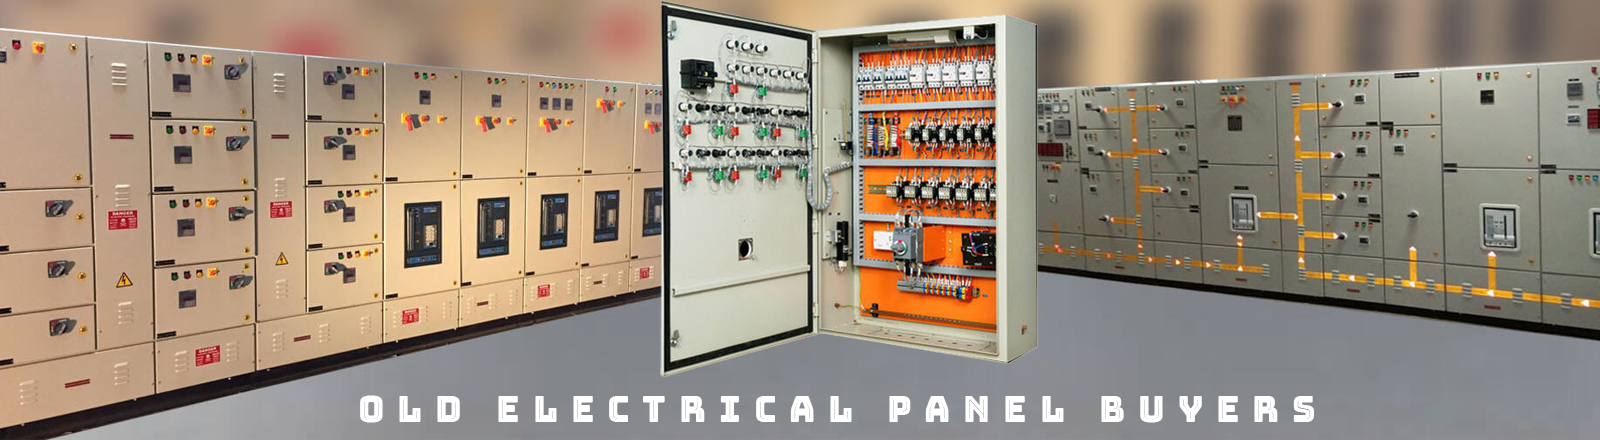 old electrical panel buyers